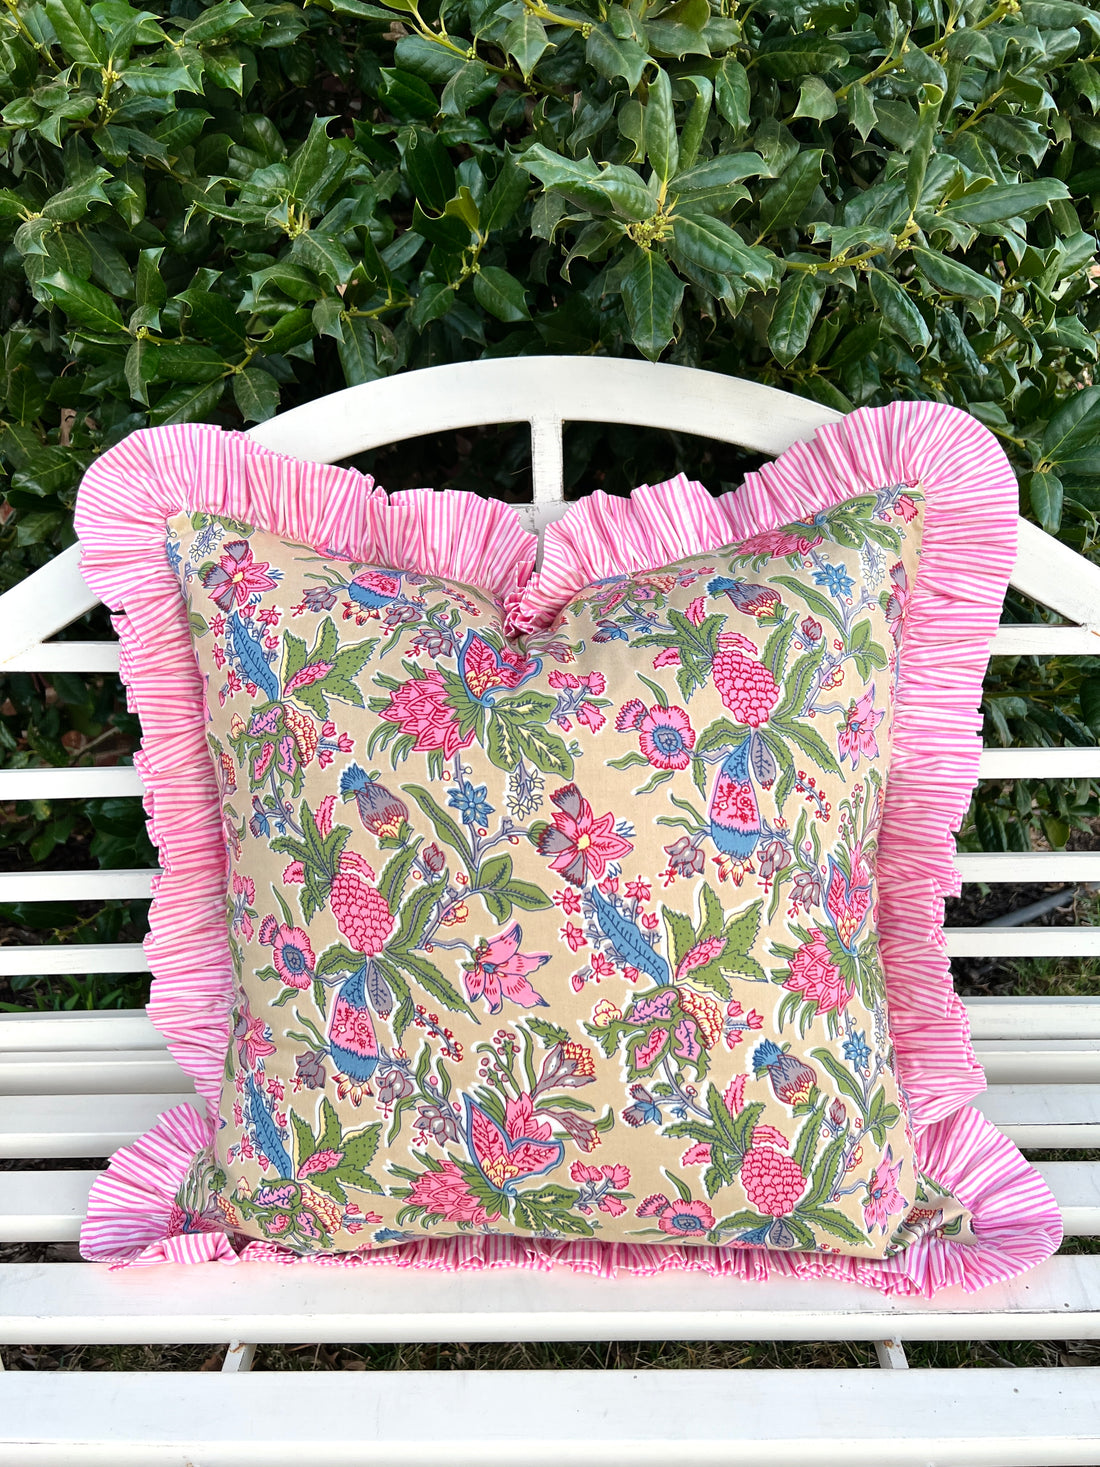 Beige, pink, green, and blue floral ruffle pillow cover